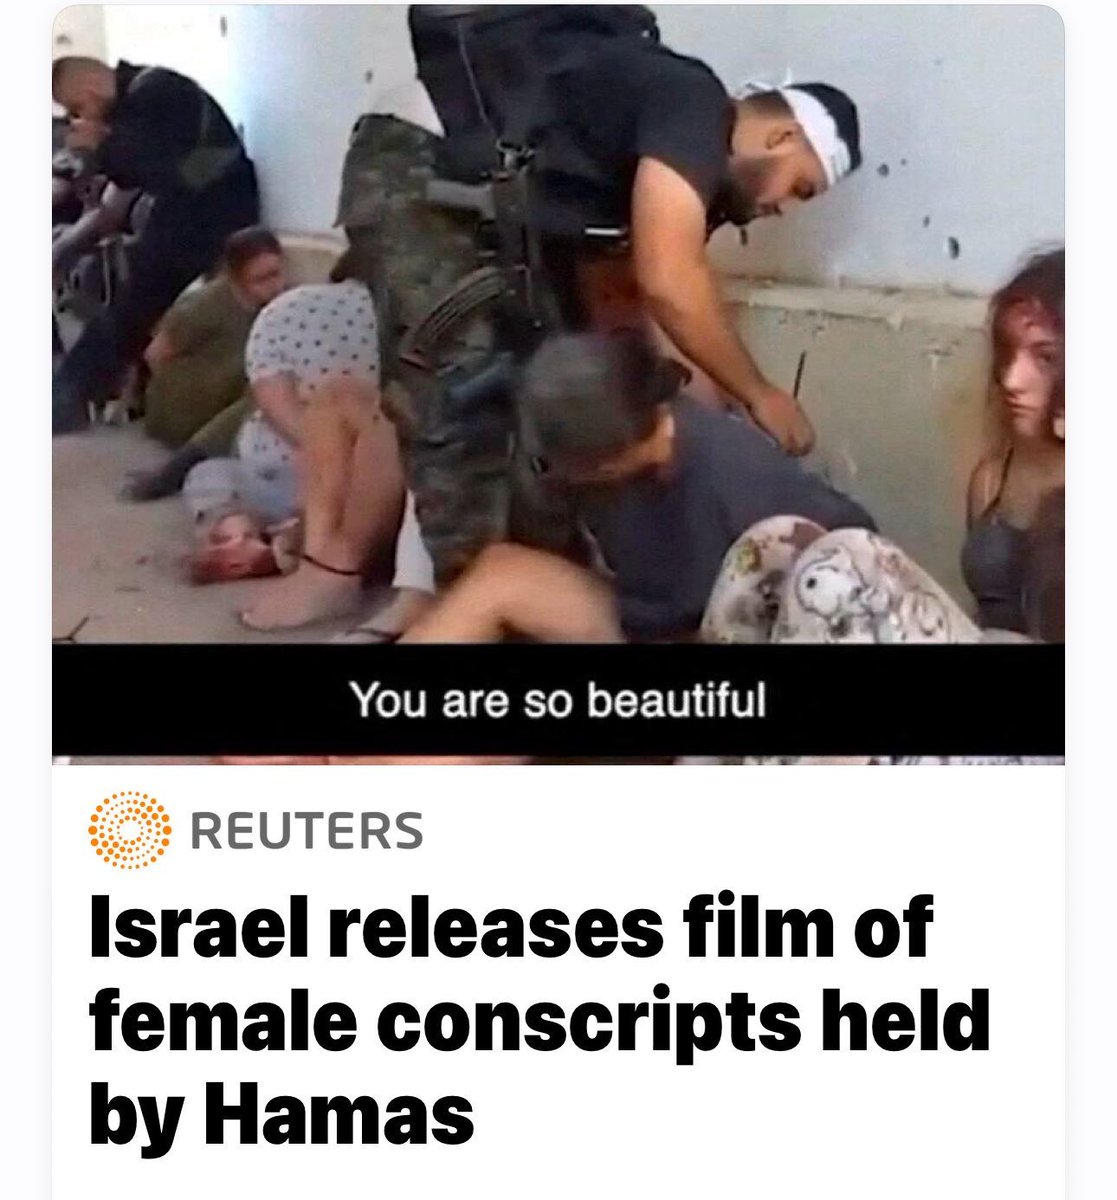 This is Hamas: cowards and rapists, abusing and terrorizing Israeli female soldiers. The UN can’t condemn Hamas and the ICC equates this depravity to Israel’s war.